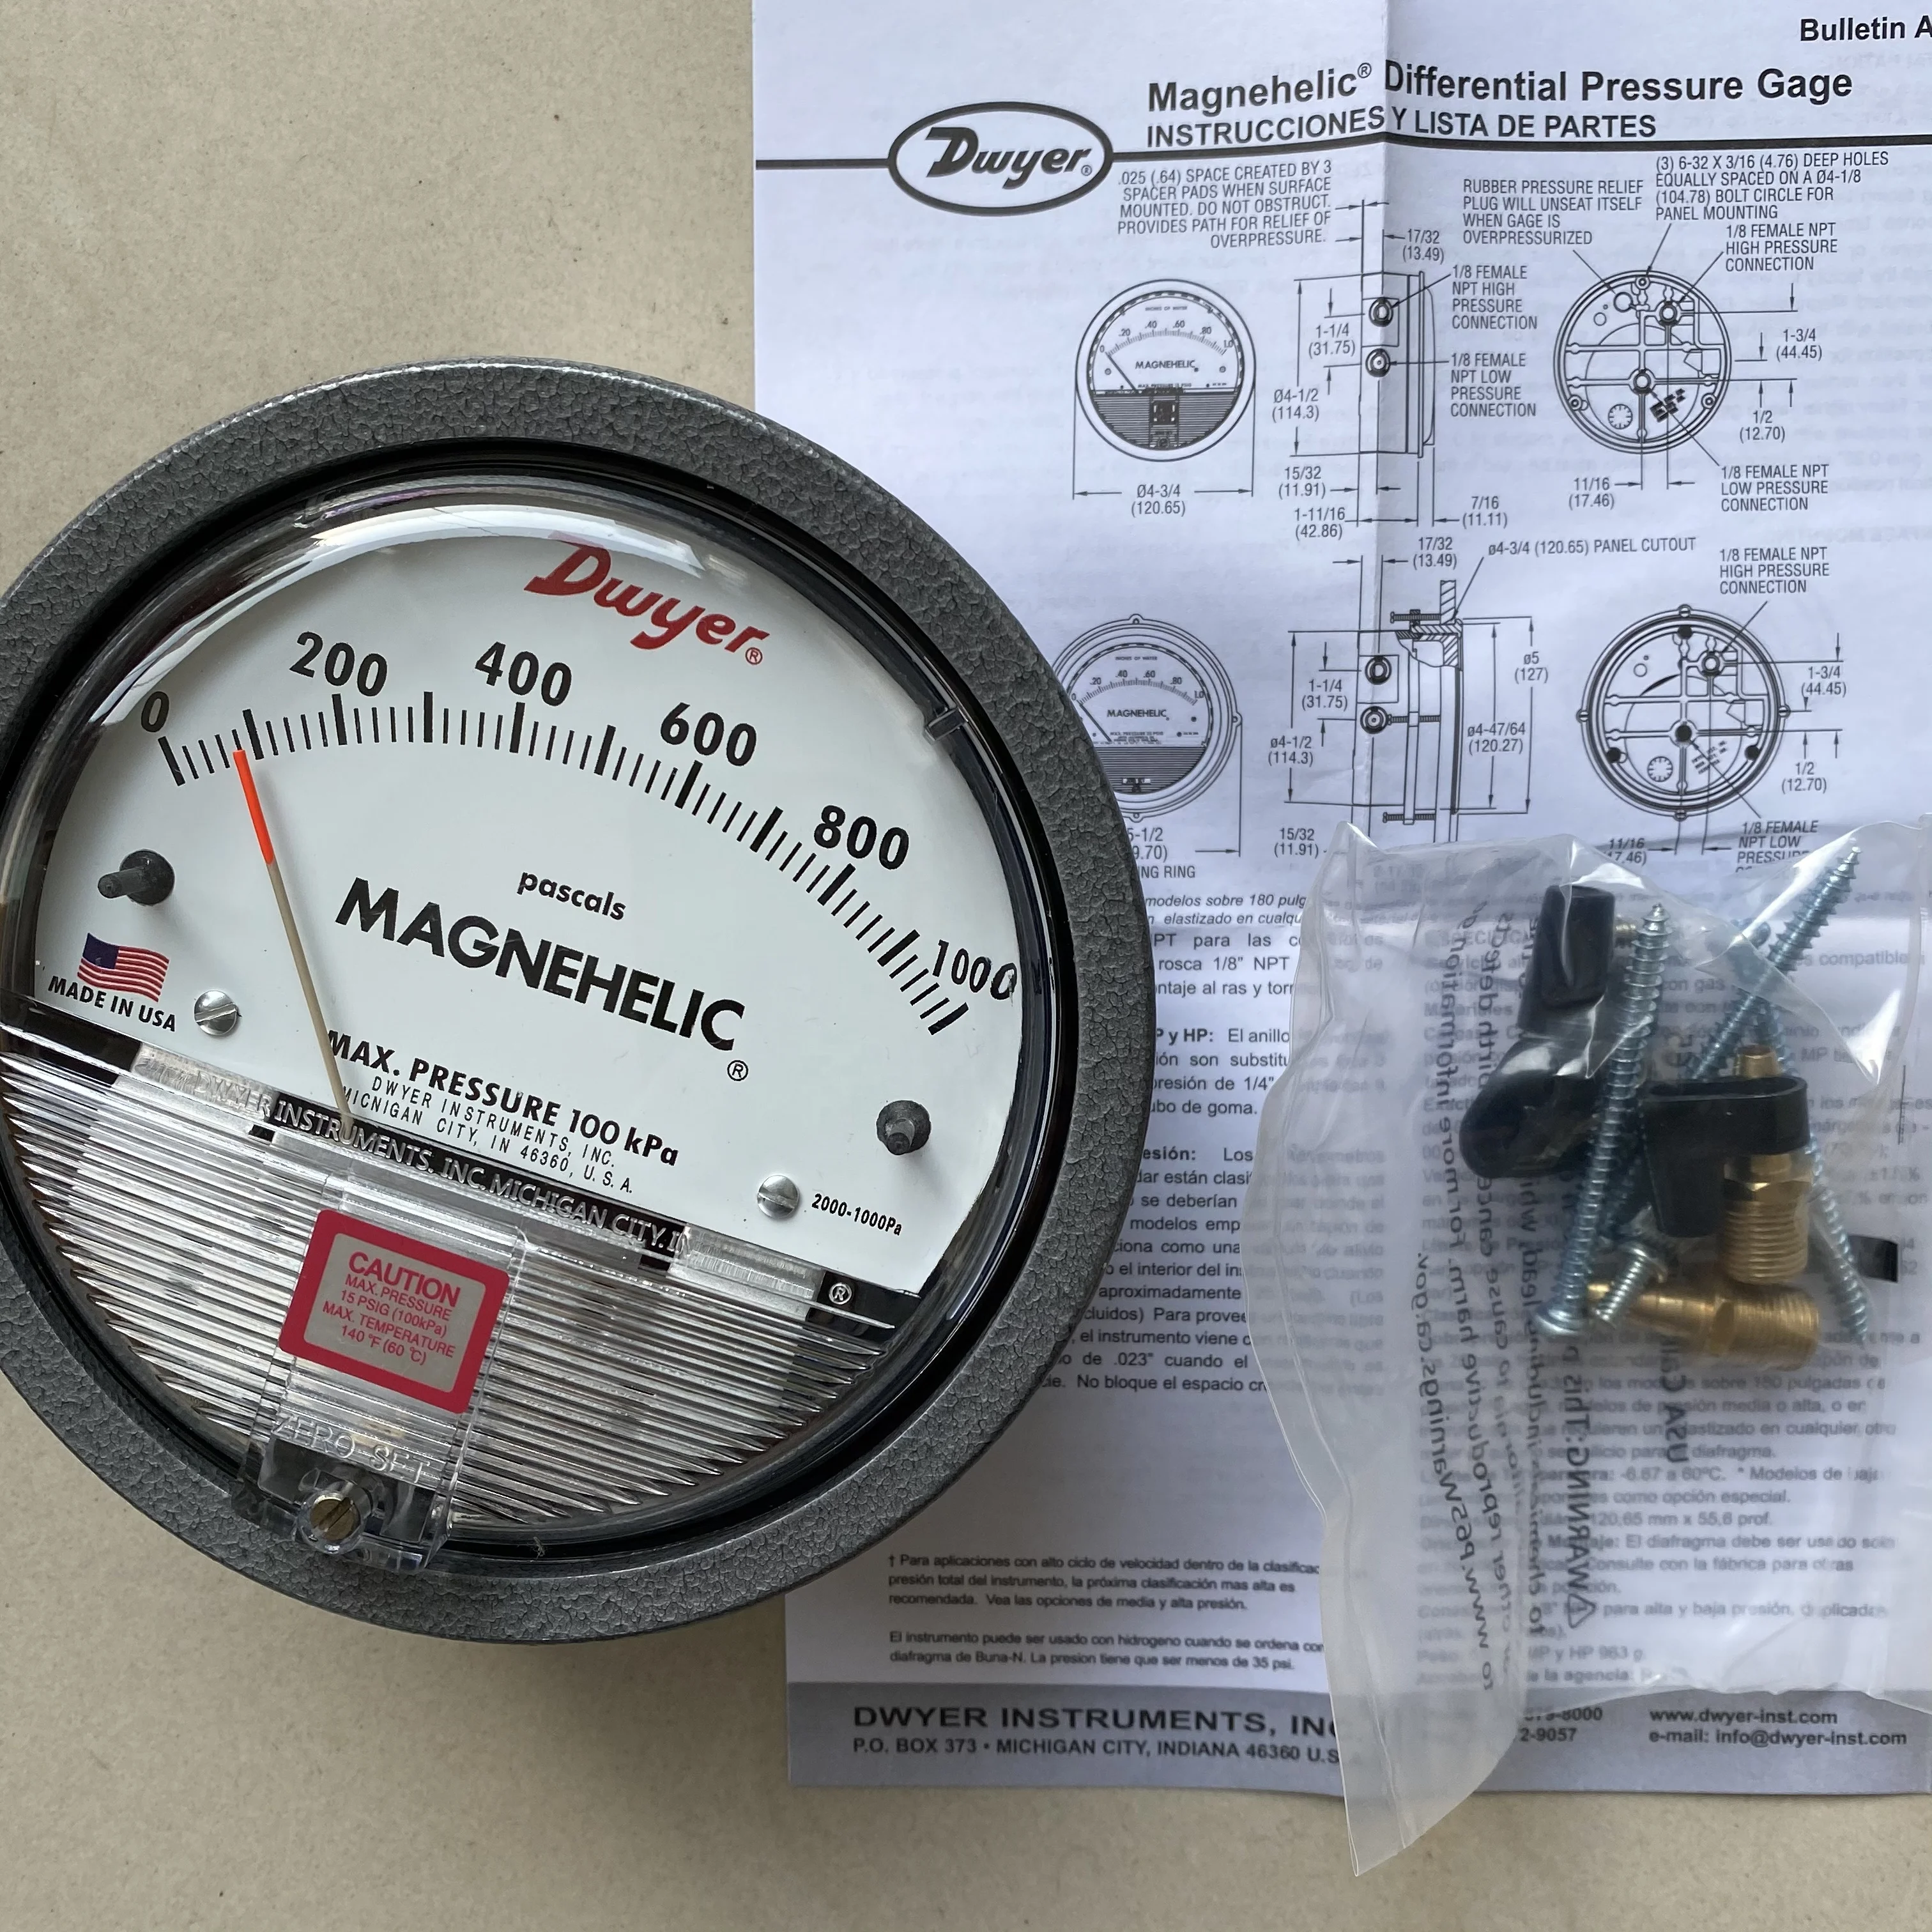 Original Dwyer Magnehelic 2000 1000mm Series Differential Pressure Gauge  With Good Quality - Buy Magnehelic Dwyer 2000,1000mm Pressure  Gages,Magnehelic Pressure Gauge Product on Alibaba.com